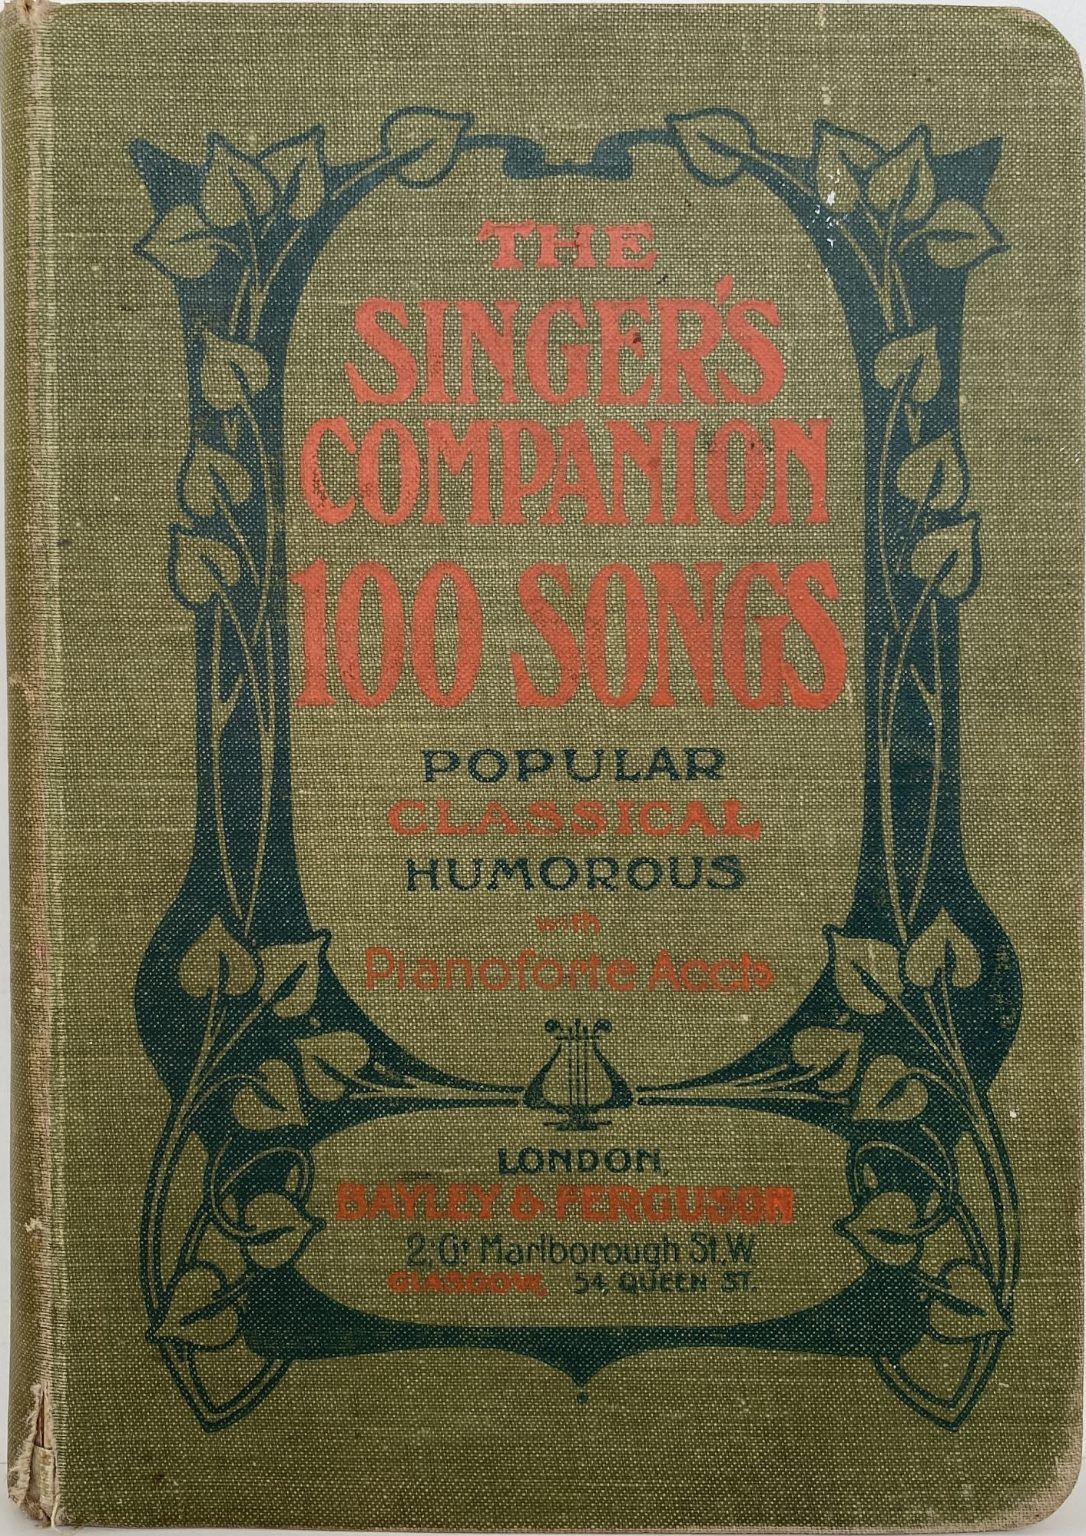 THE SIGNER’S COMPANION: 100 Songs Popular, Classical, Humorous